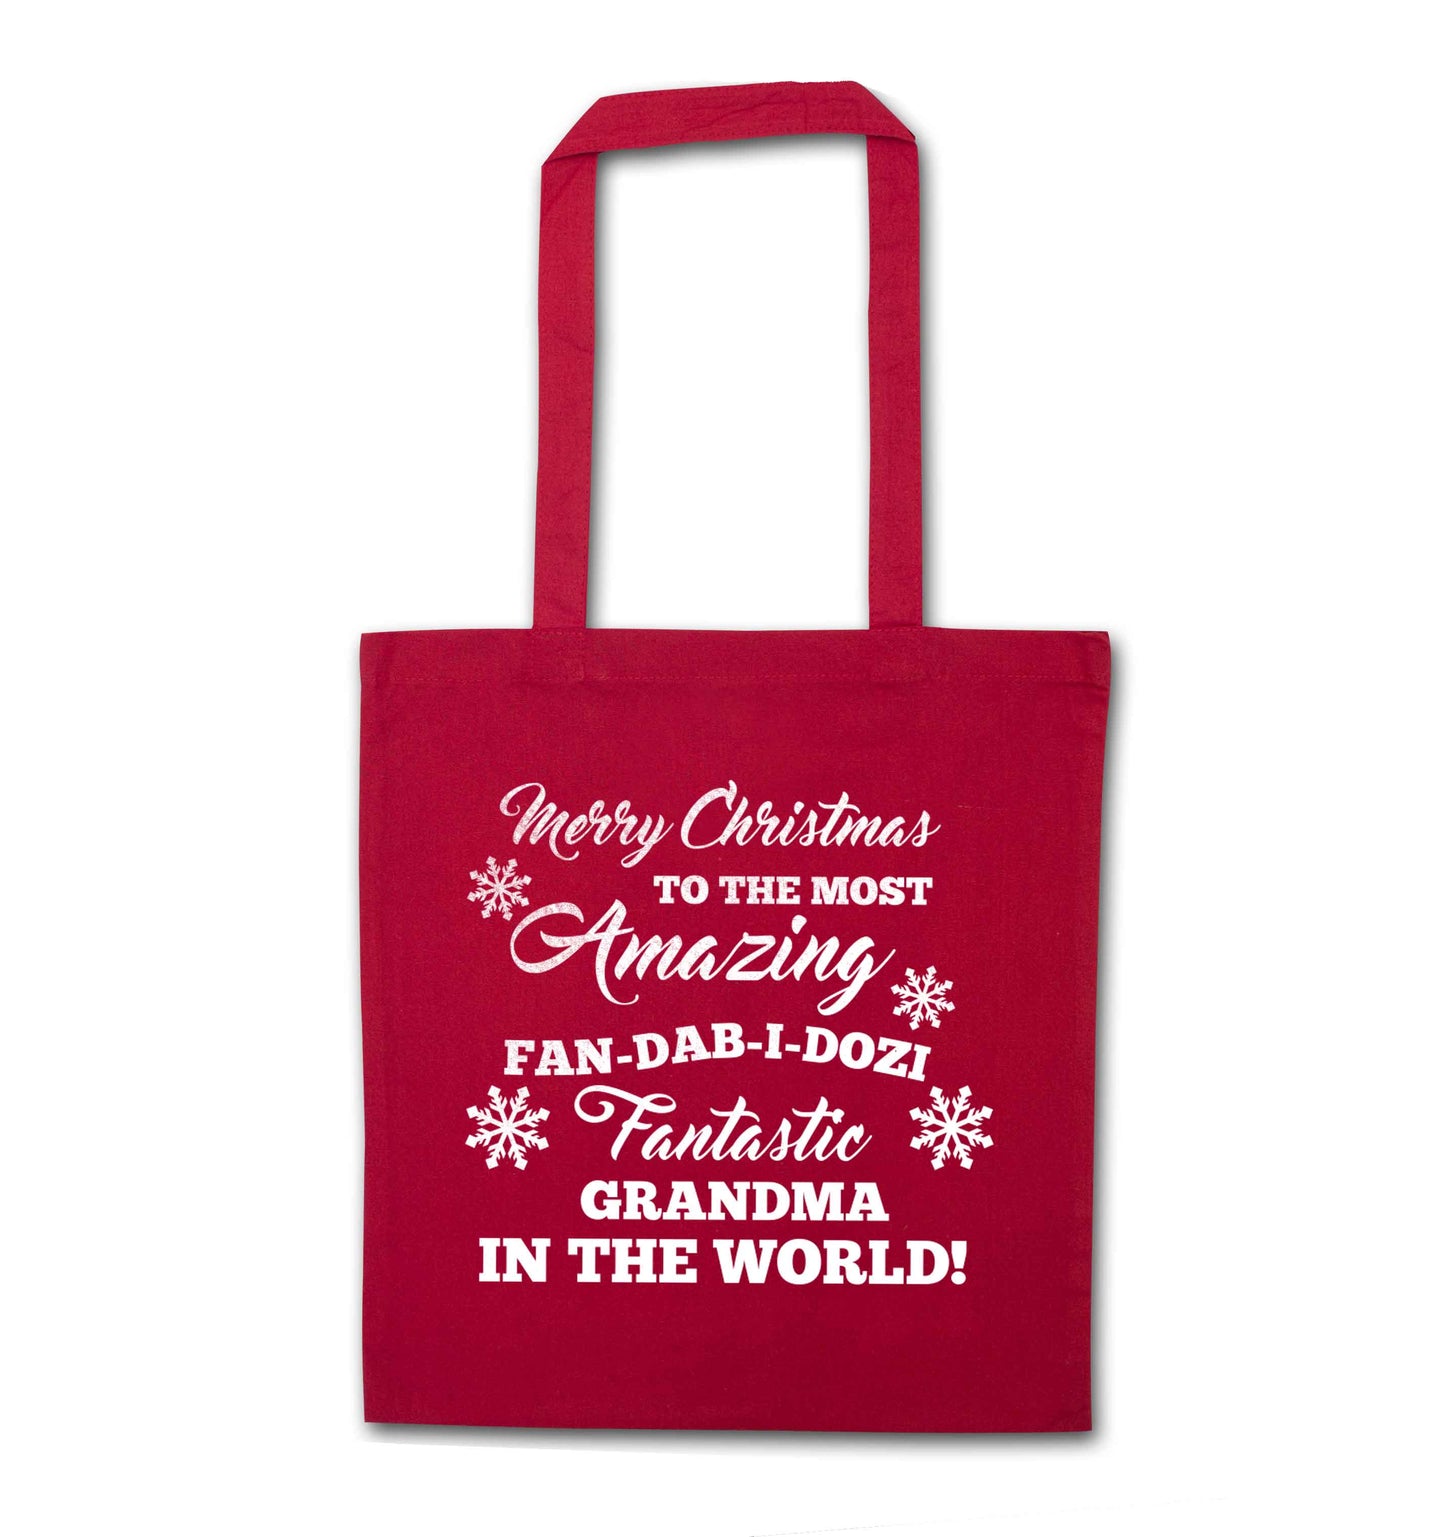 Merry Christmas to the most amazing fan-dab-i-dozi fantasic Grandma in the world red tote bag